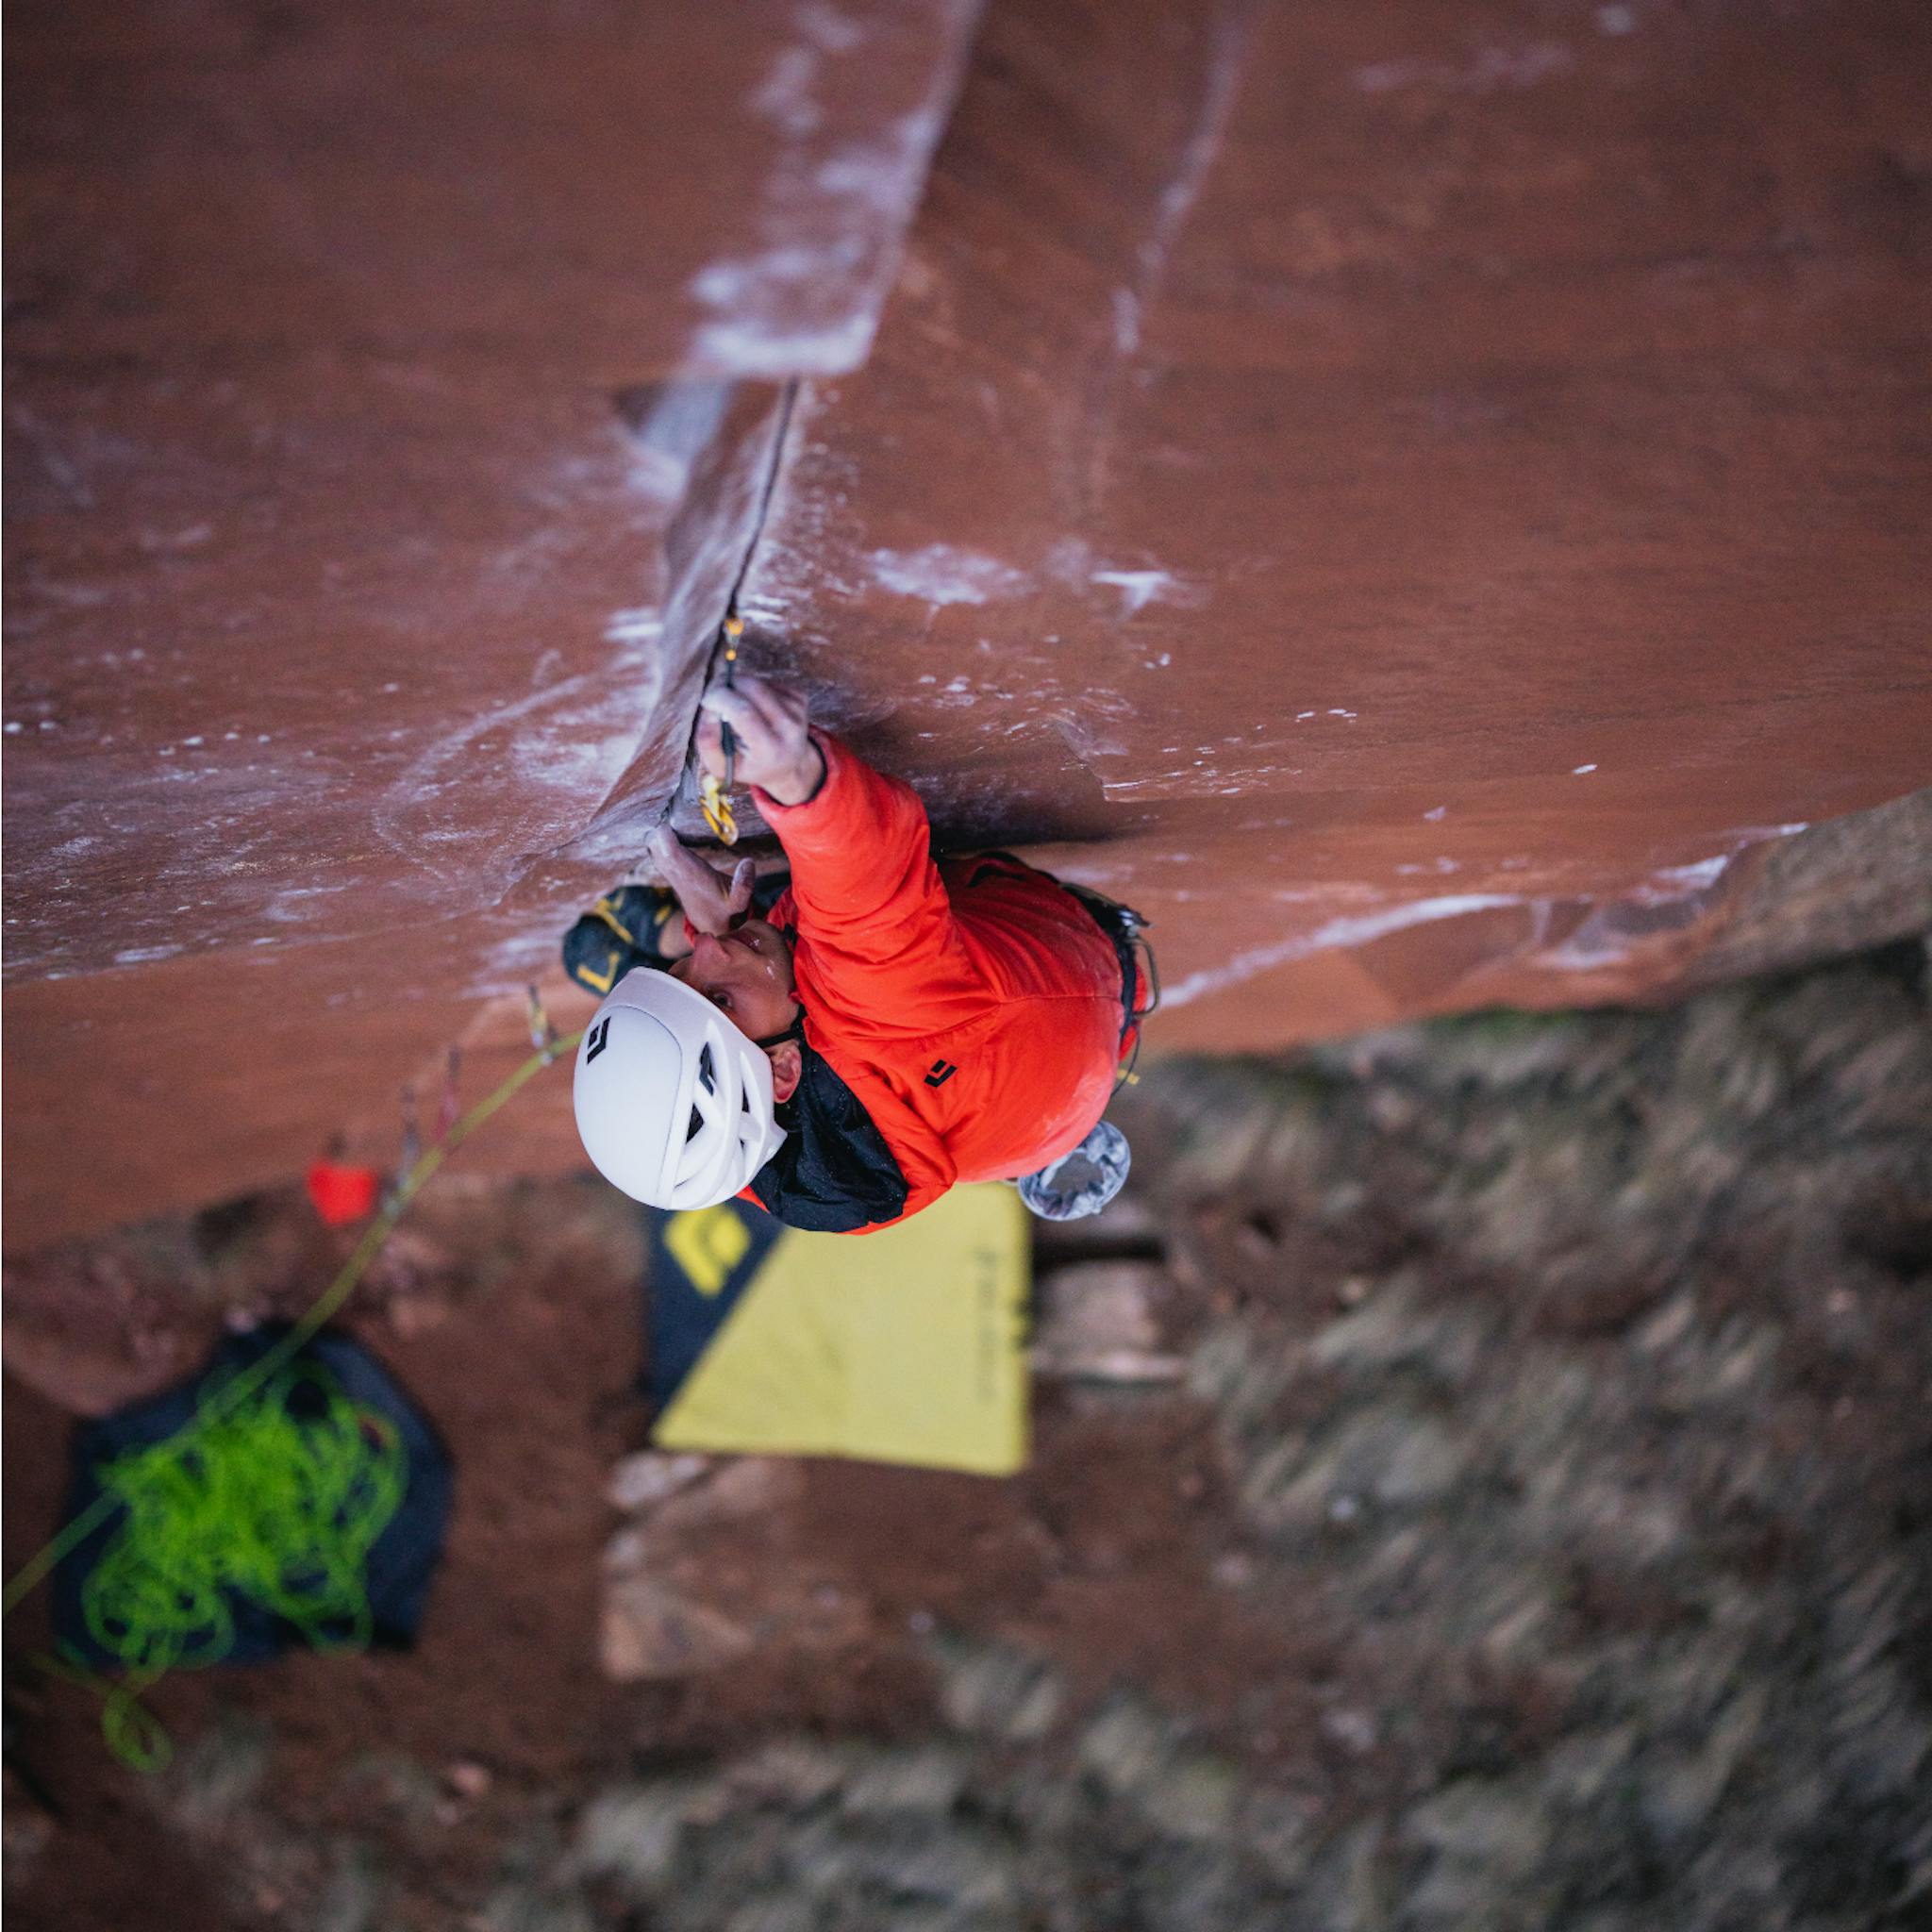 BD athlete Conor Herson climbing in Indian Creek.